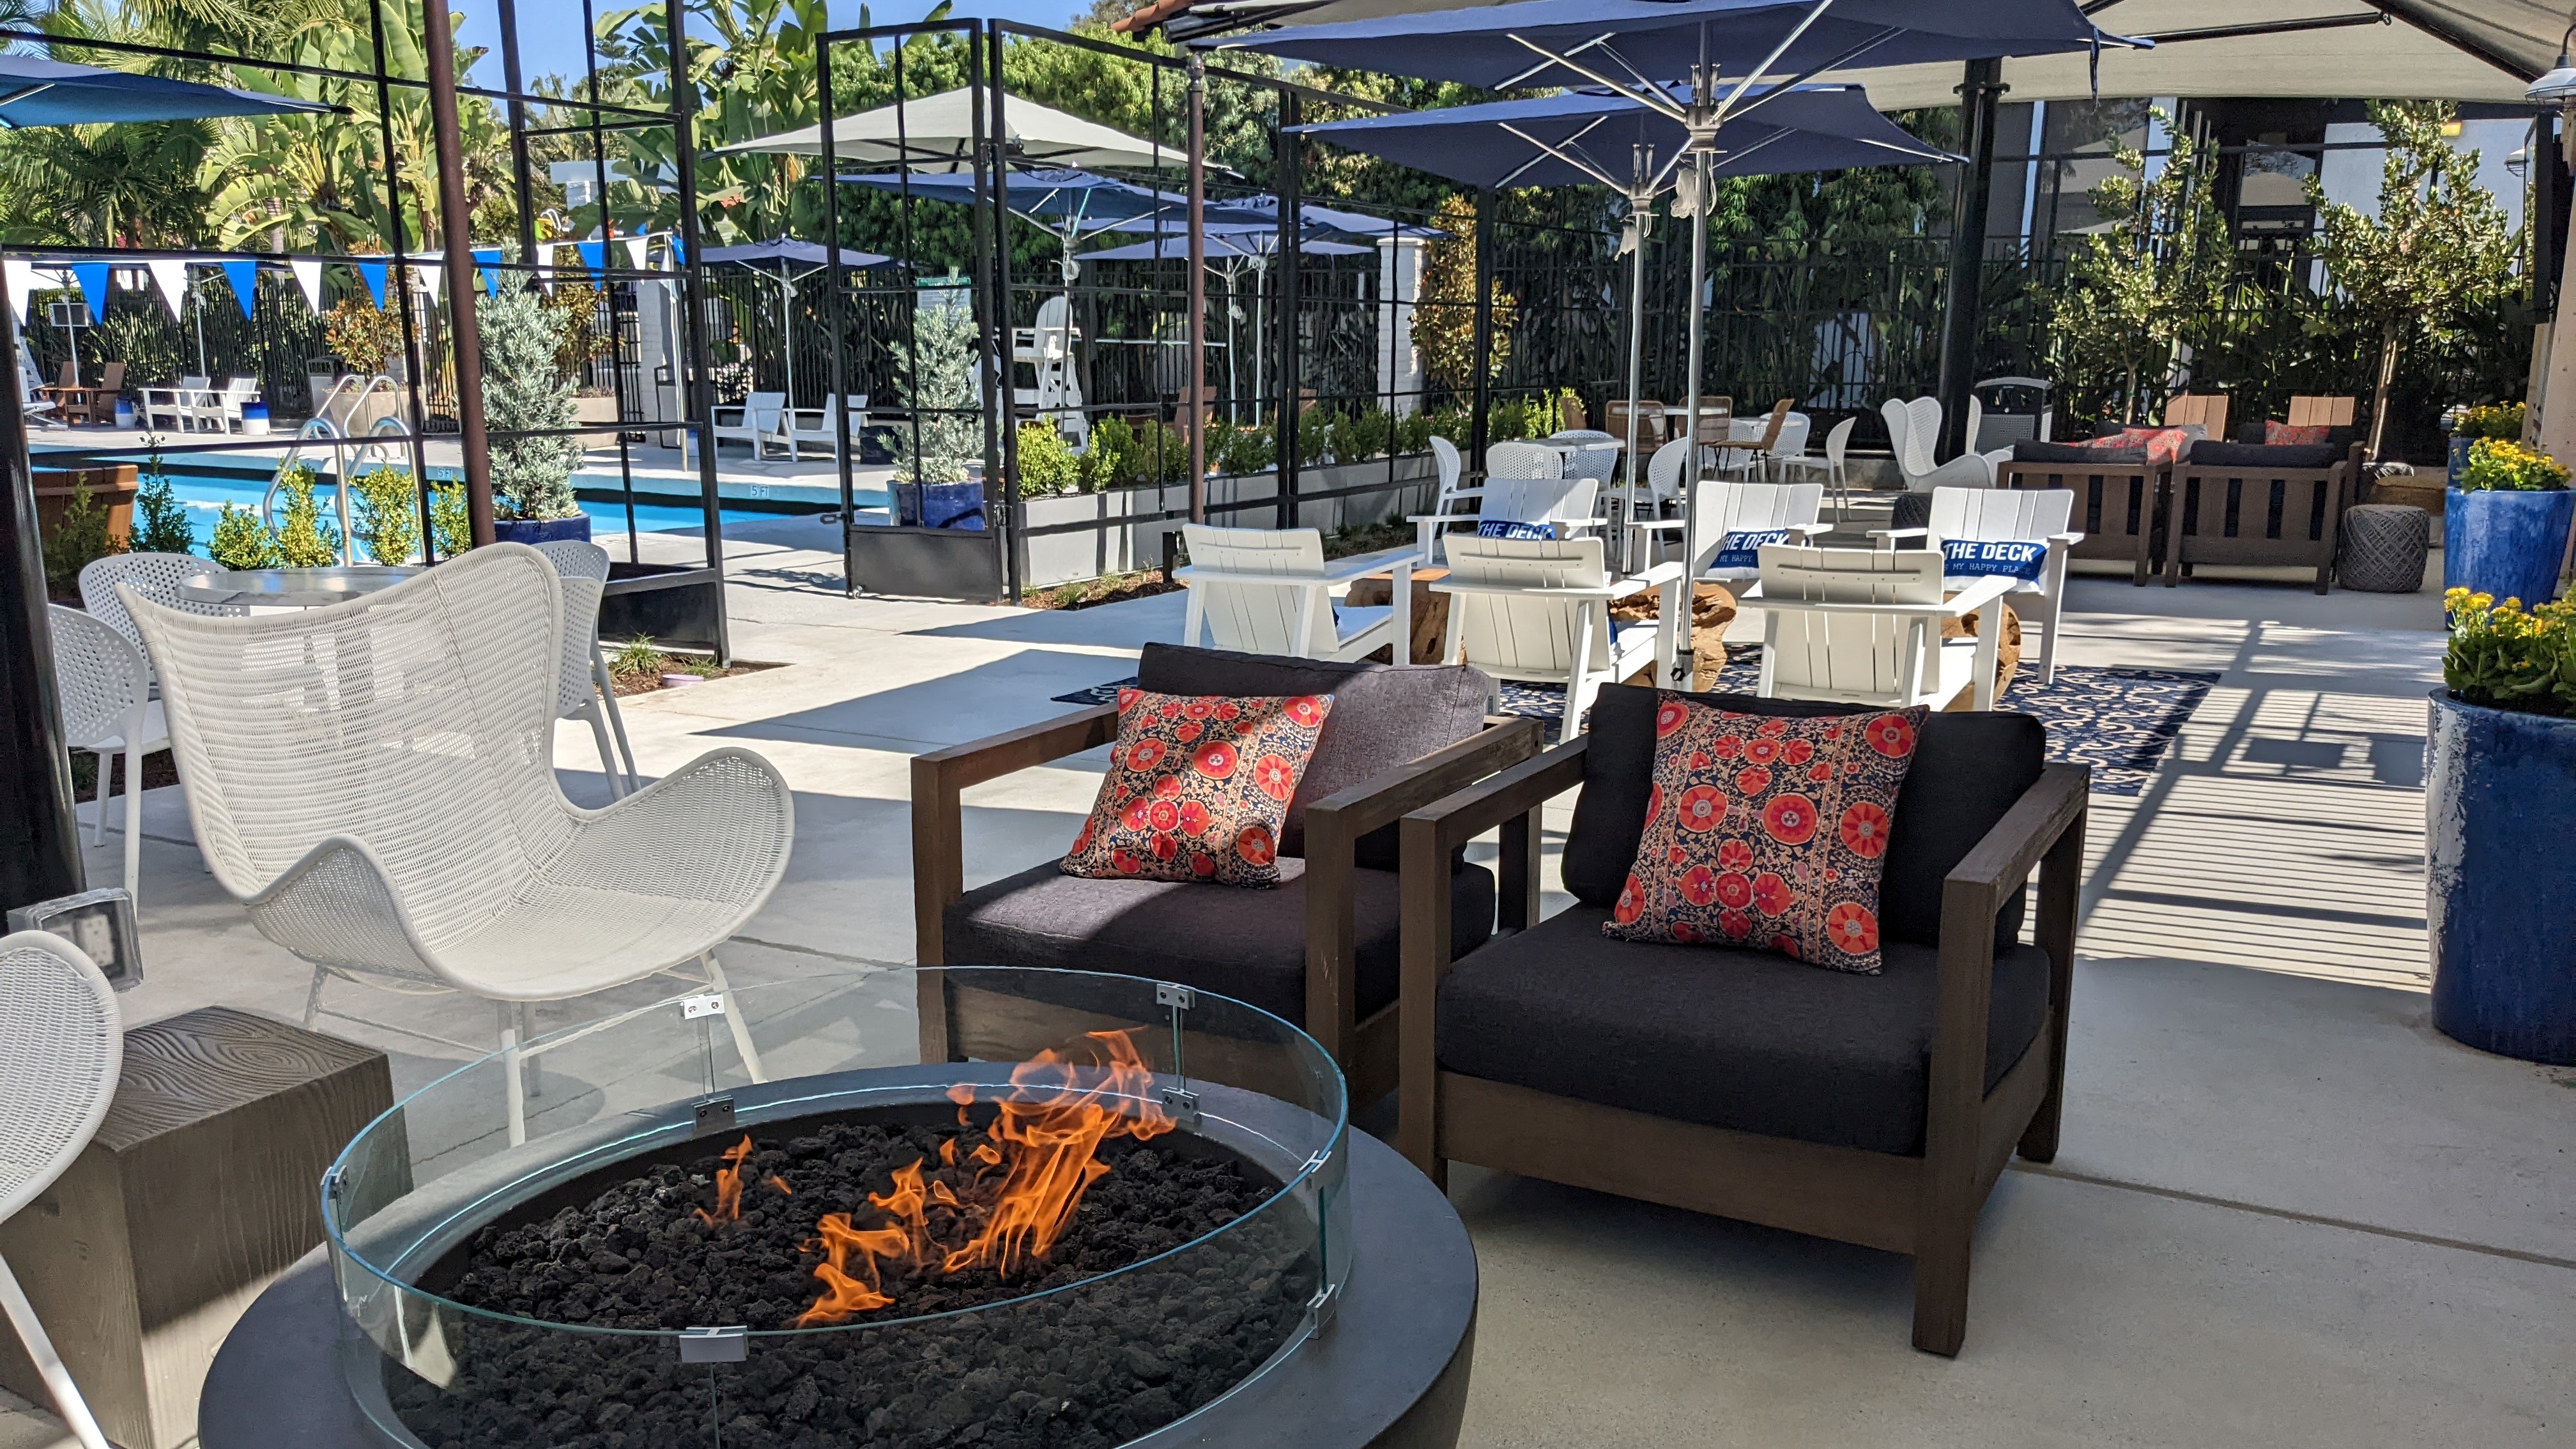 Pool deck space with chairs and fire pits